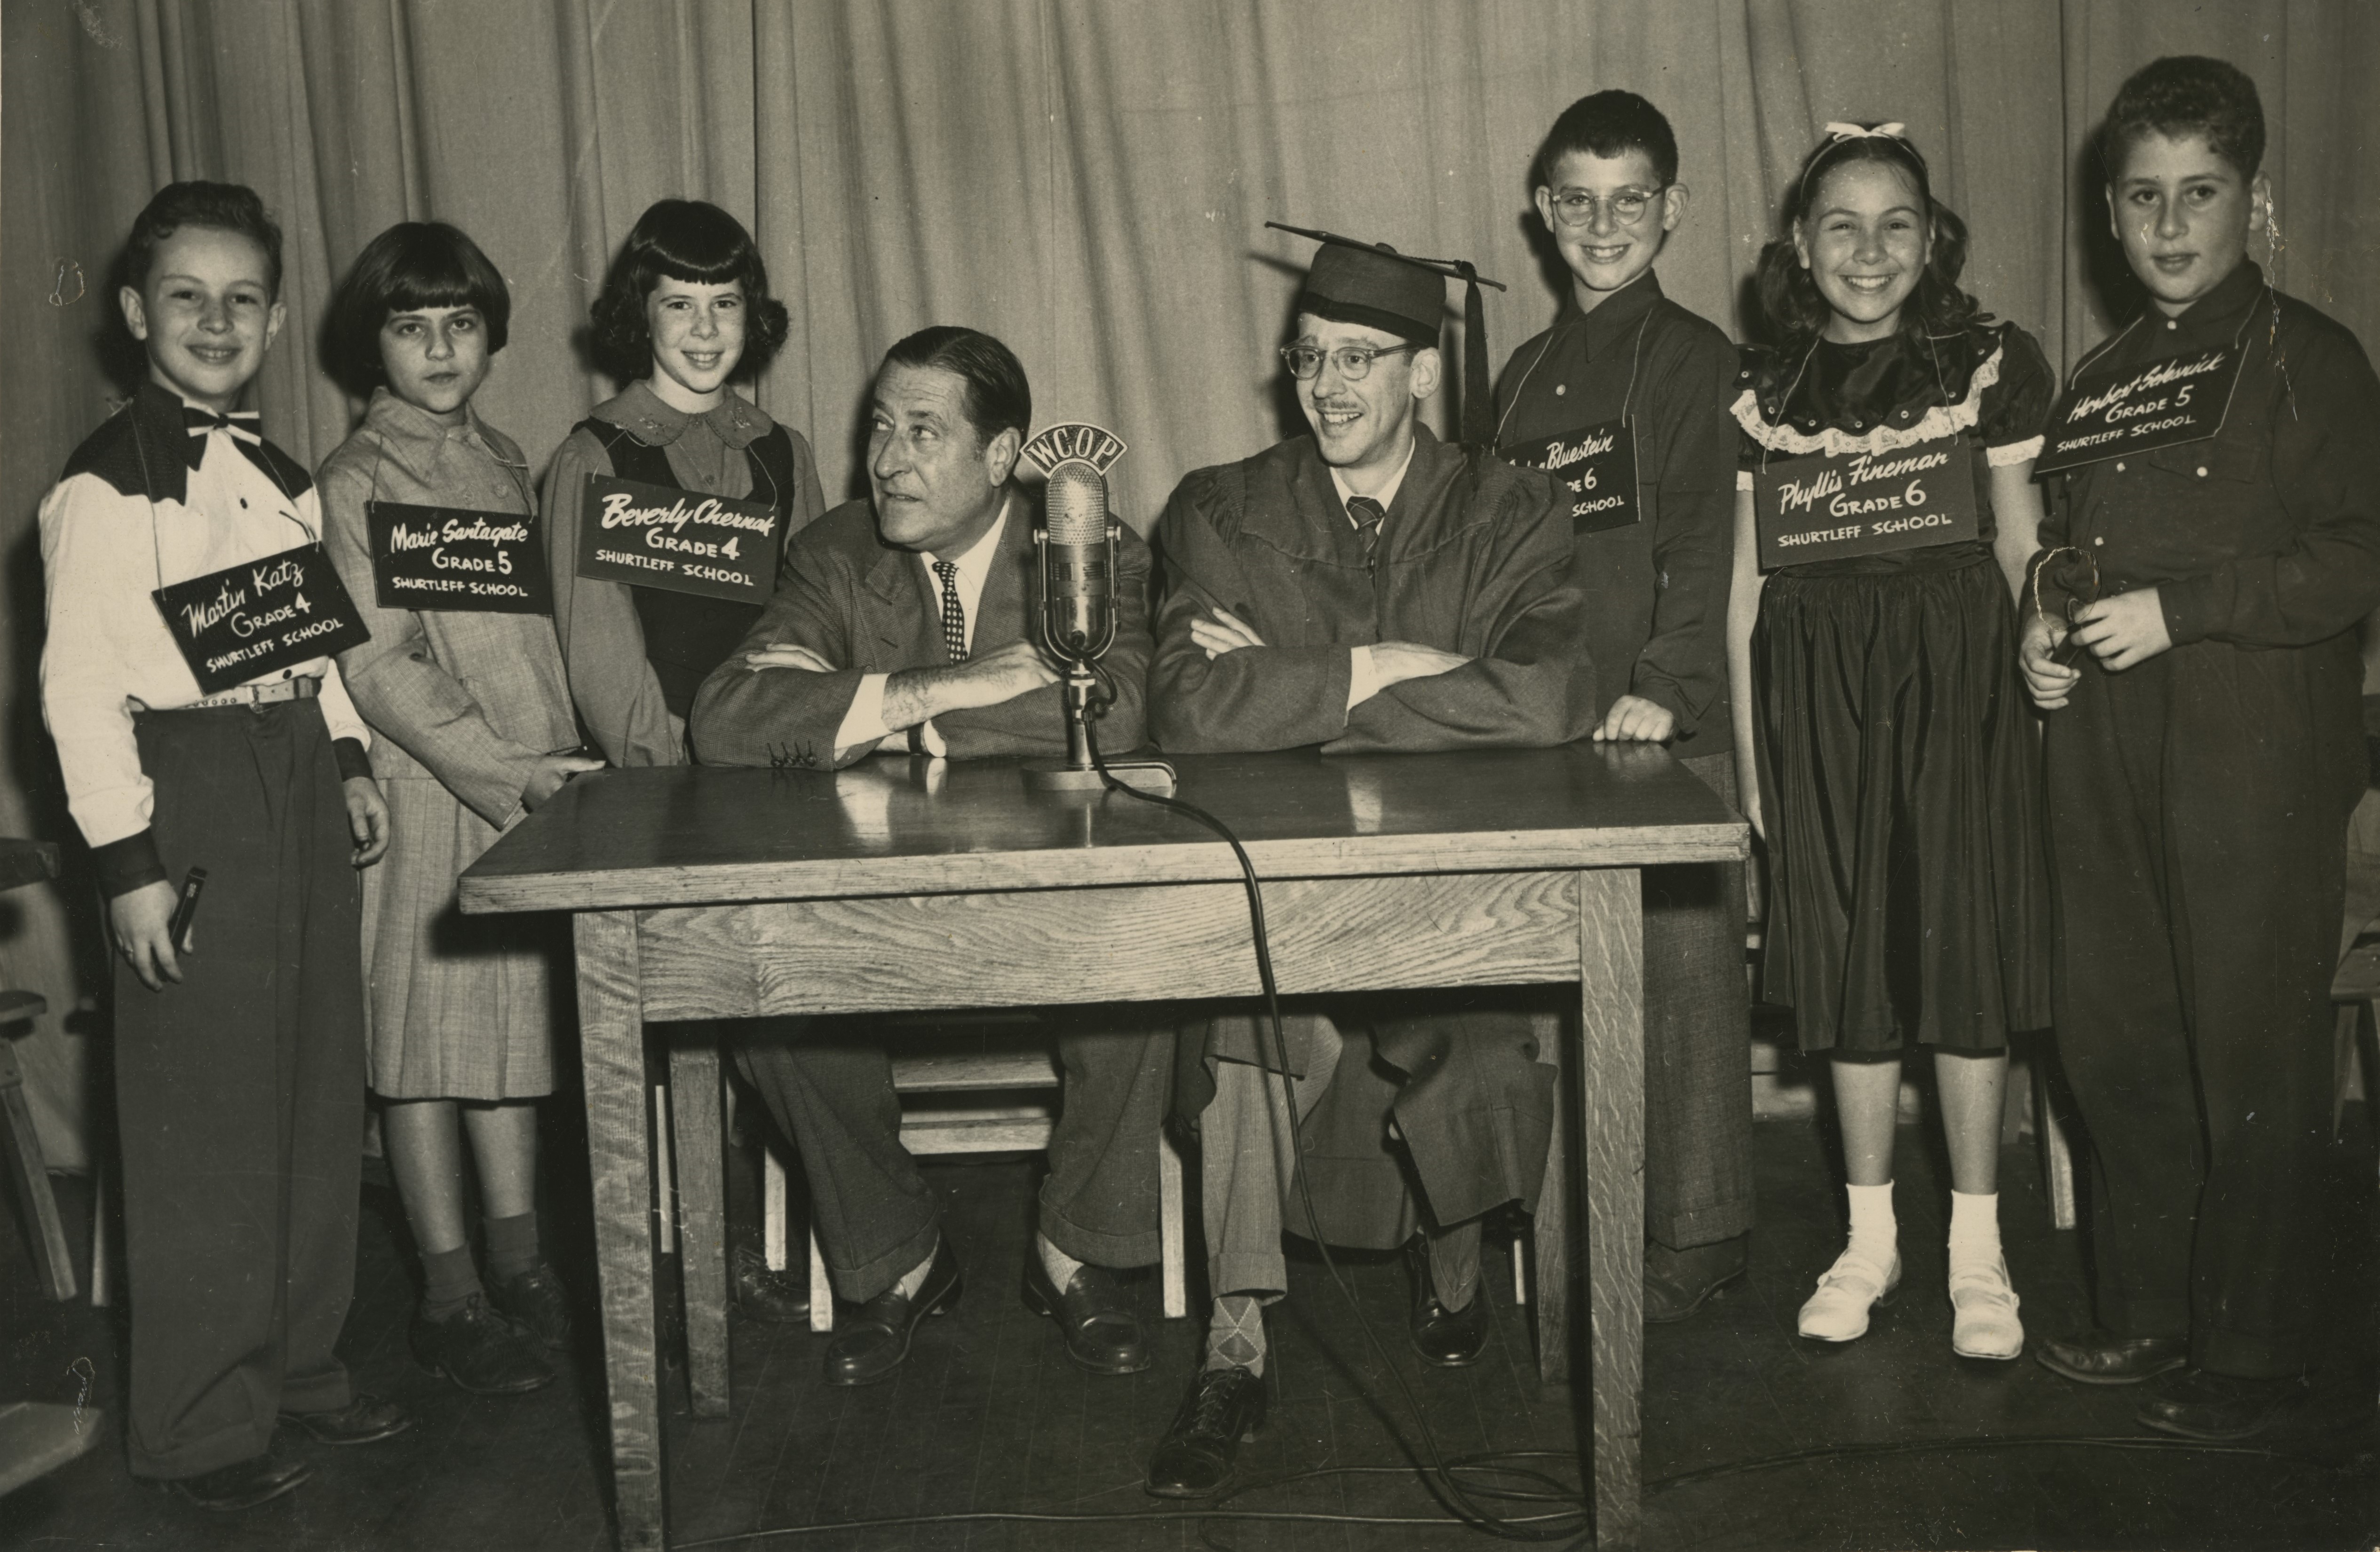 Quizdown at Shurtleff School in Chelsea, undated, Sterling and Selesnick Family Papers in the JHC archive.